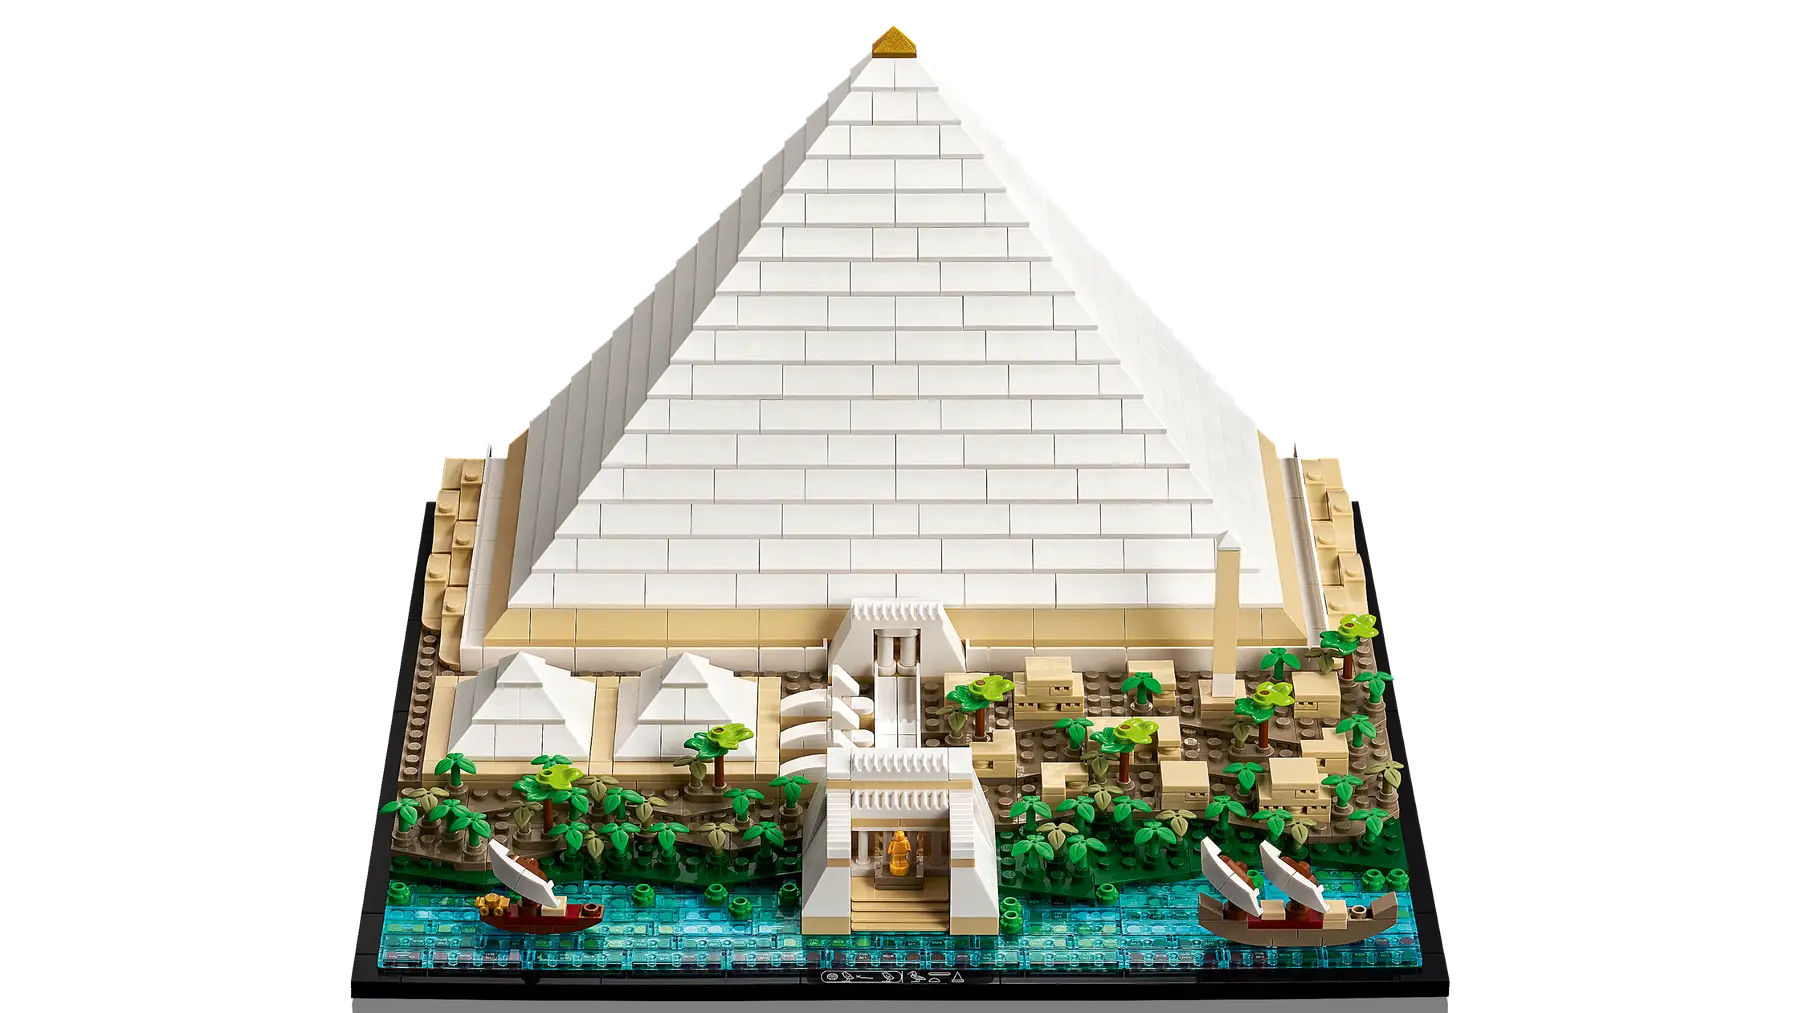 Lego Architecture - The Great Pyramid Of Giza